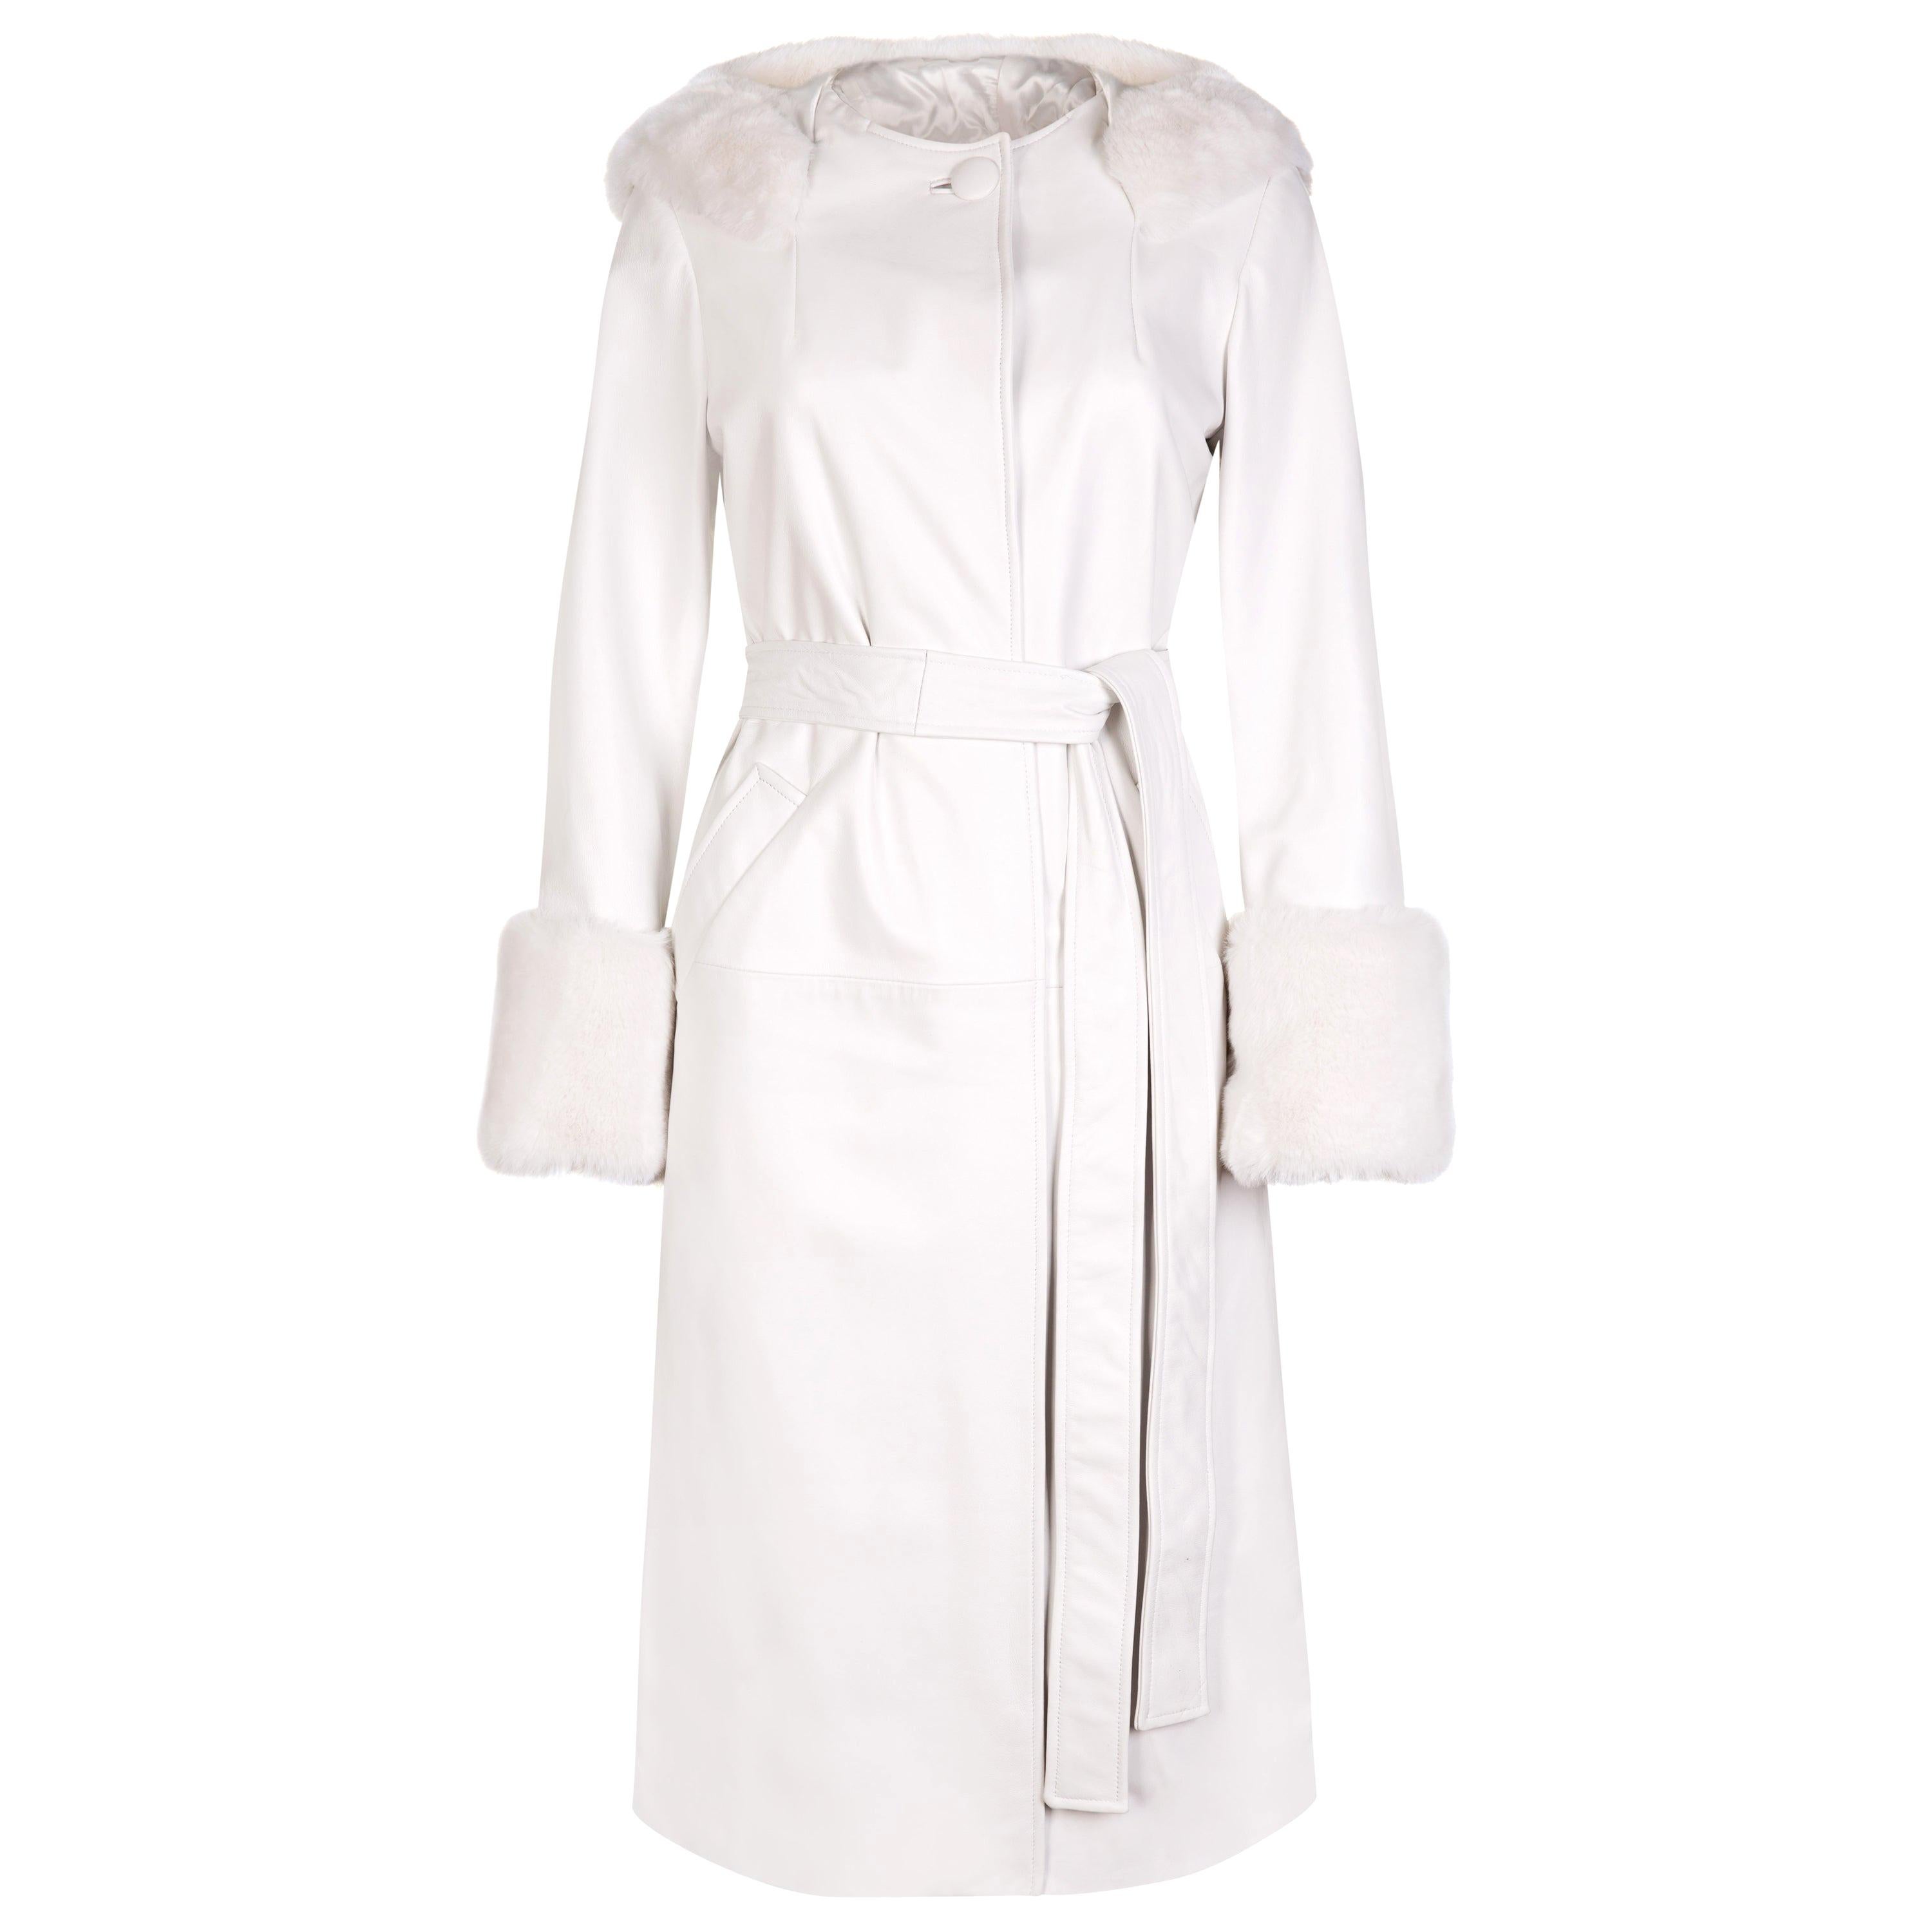 Verheyen Aurora Hooded Leather Trench Coat in White with Faux Fur - Size uk 10 For Sale